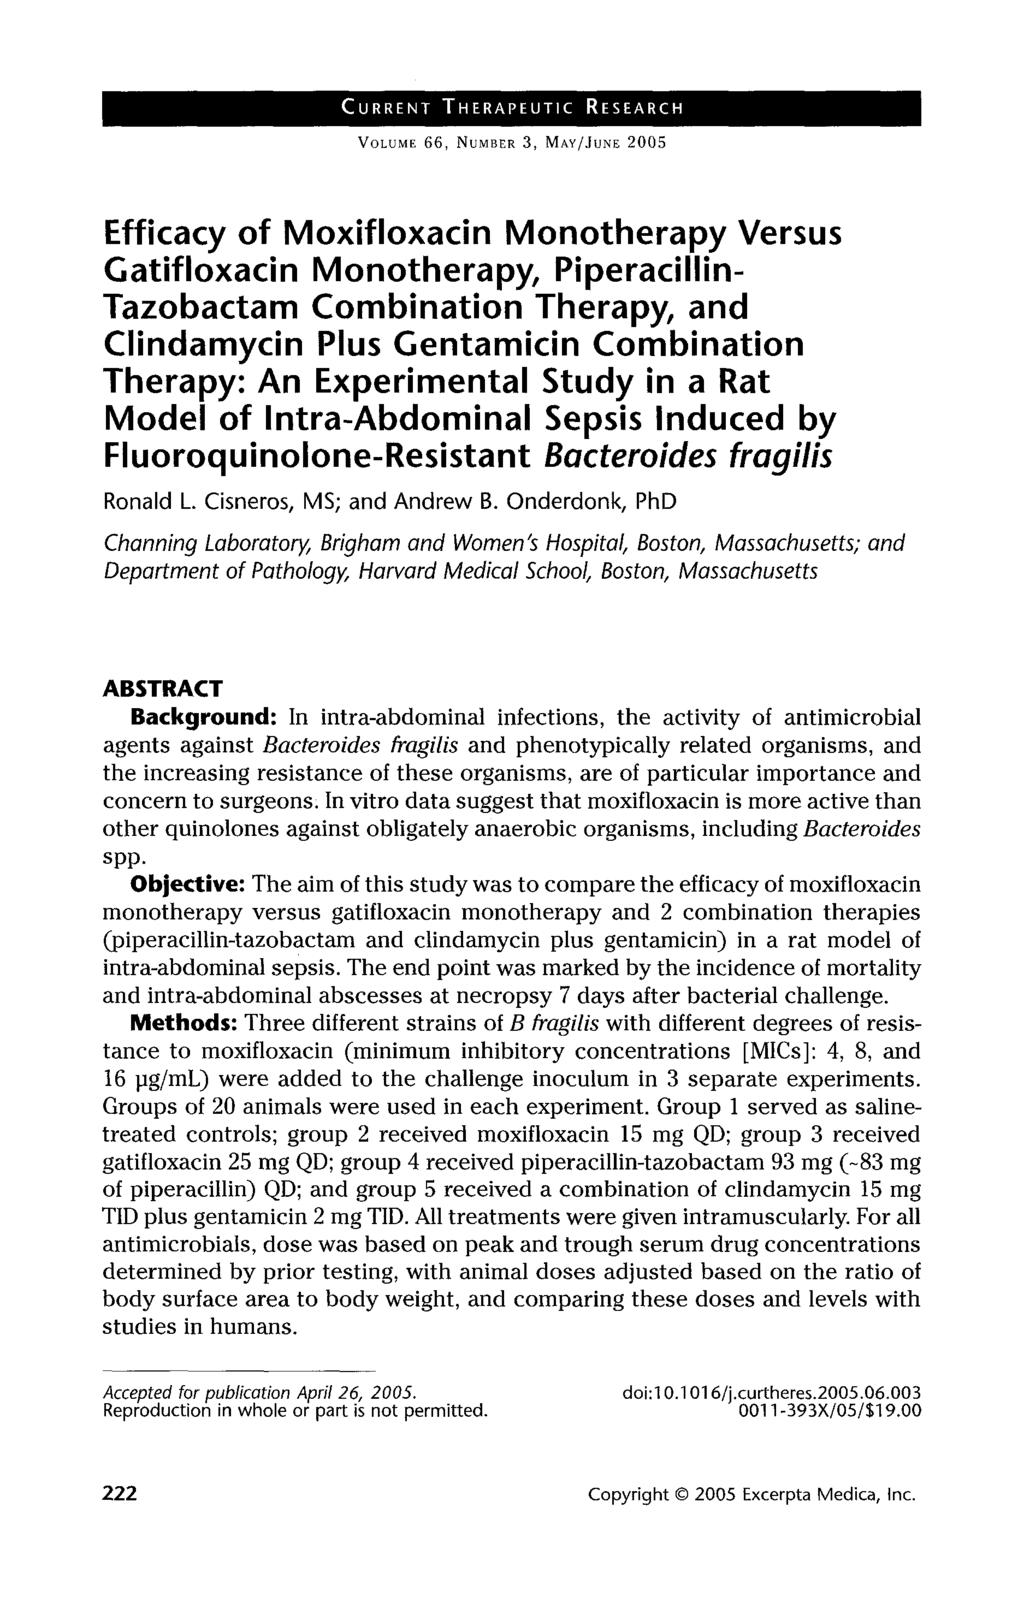 .'URRENT THERAPEUTIC RESEA VOLUME 66, NUMBER 3, MAY/JuNE 2005 Efficacy of Moxifloxacin Monotherapy Versus Gatifloxacin Monotherapy, Piperacillin- Tazobactam Combination Therapy, and Clindamycin Plus